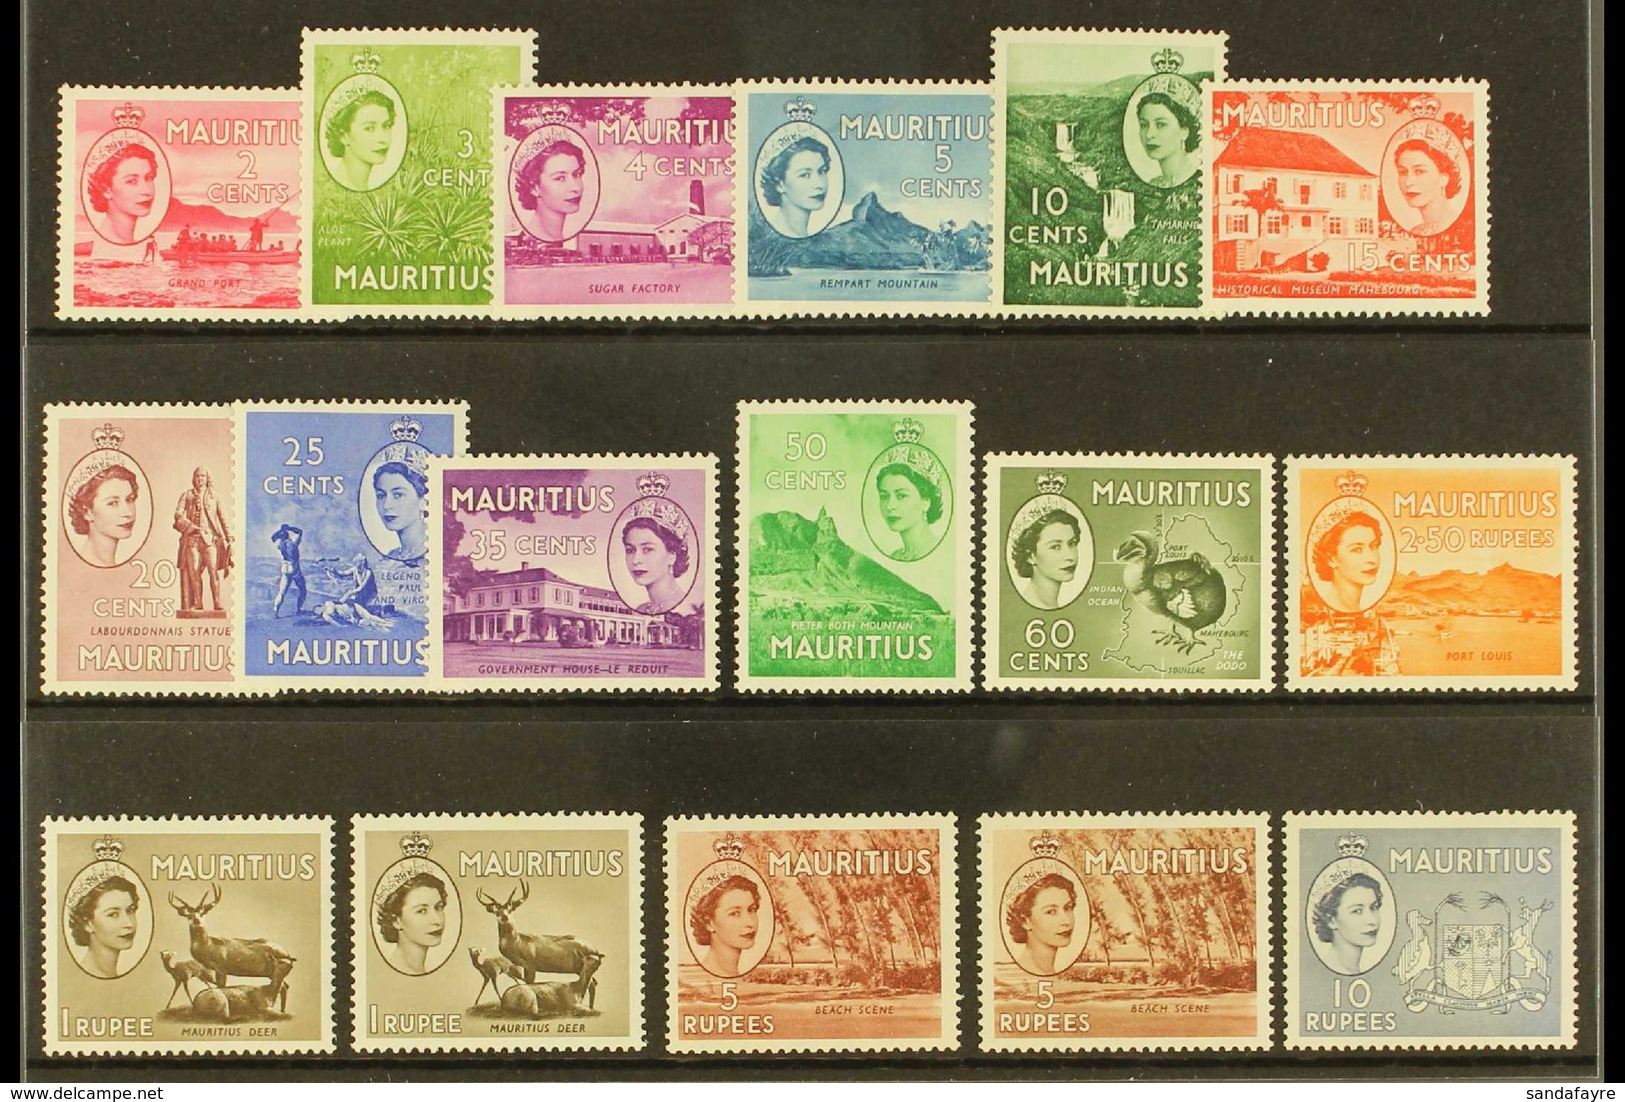 1953 1953-58 Pictorial Definitive Set Plus Listed 1r & 5r Shades, SG 293/306, Never Hinged Mint (17 Stamps) For More Ima - Mauritius (...-1967)